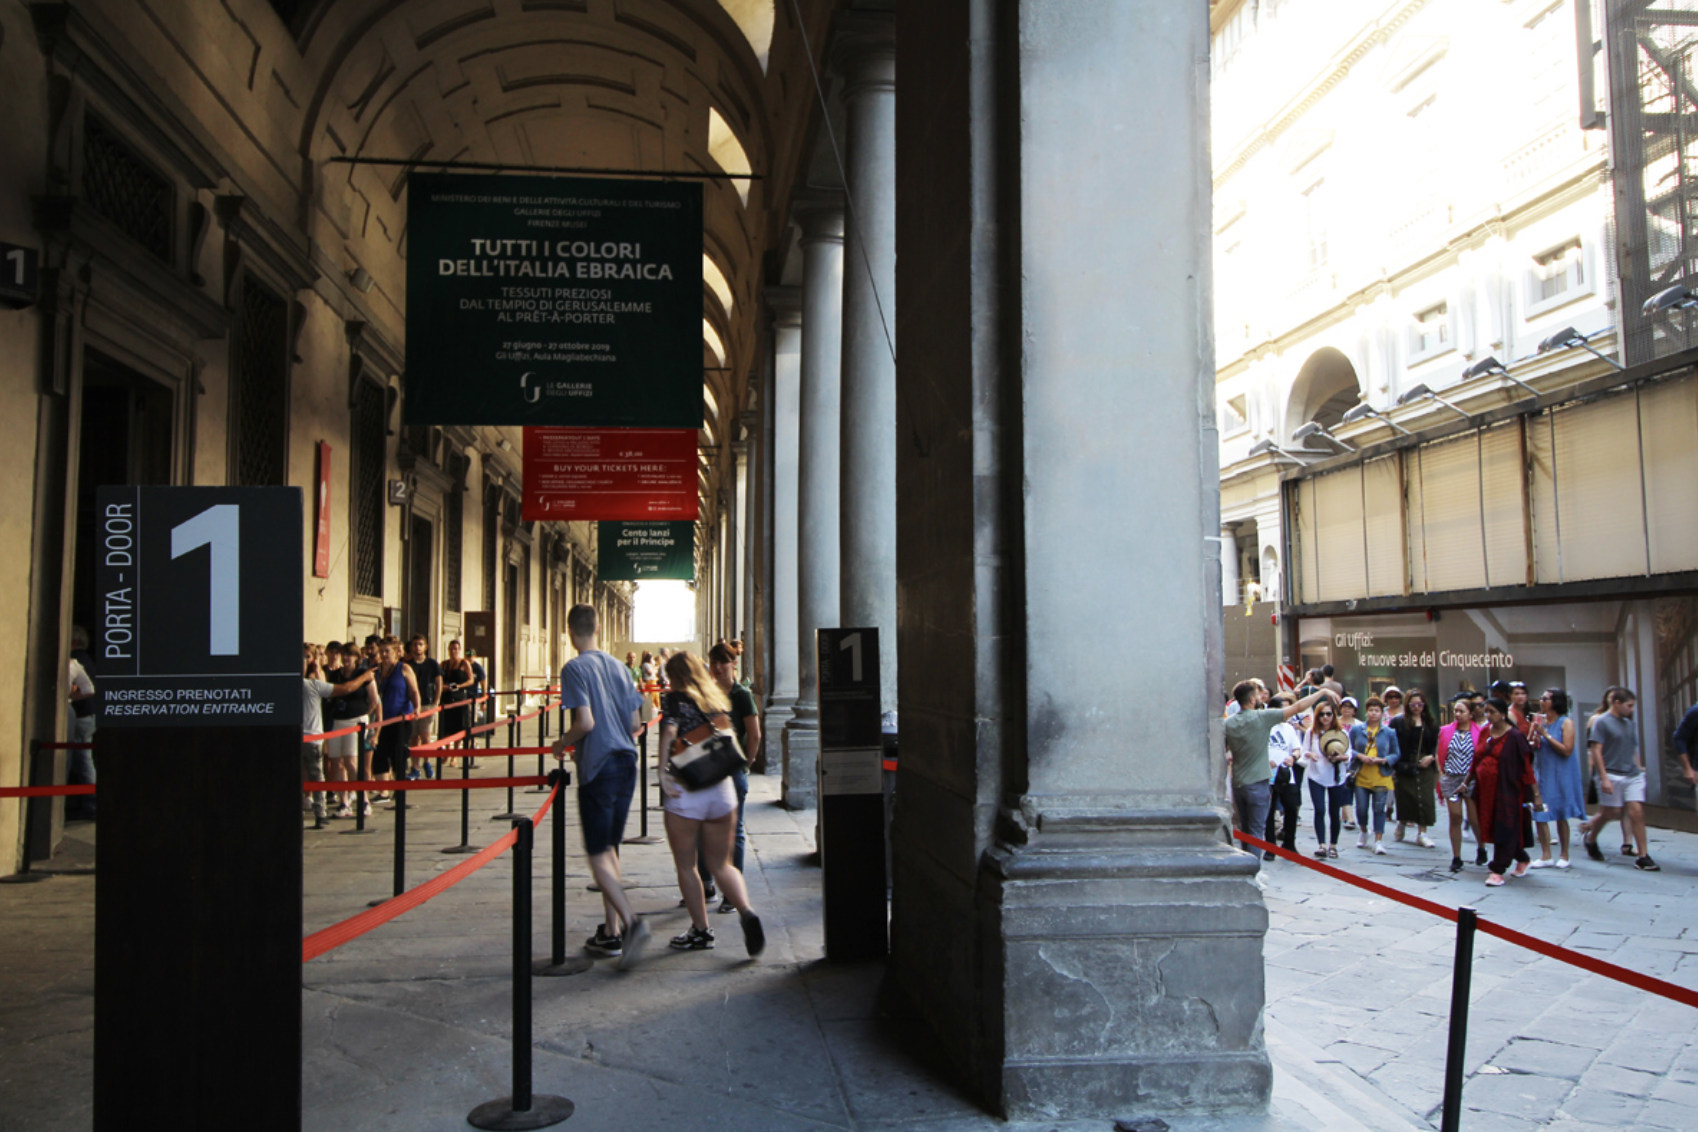 Uffizi Gallery – booked admissions – Door n. 1